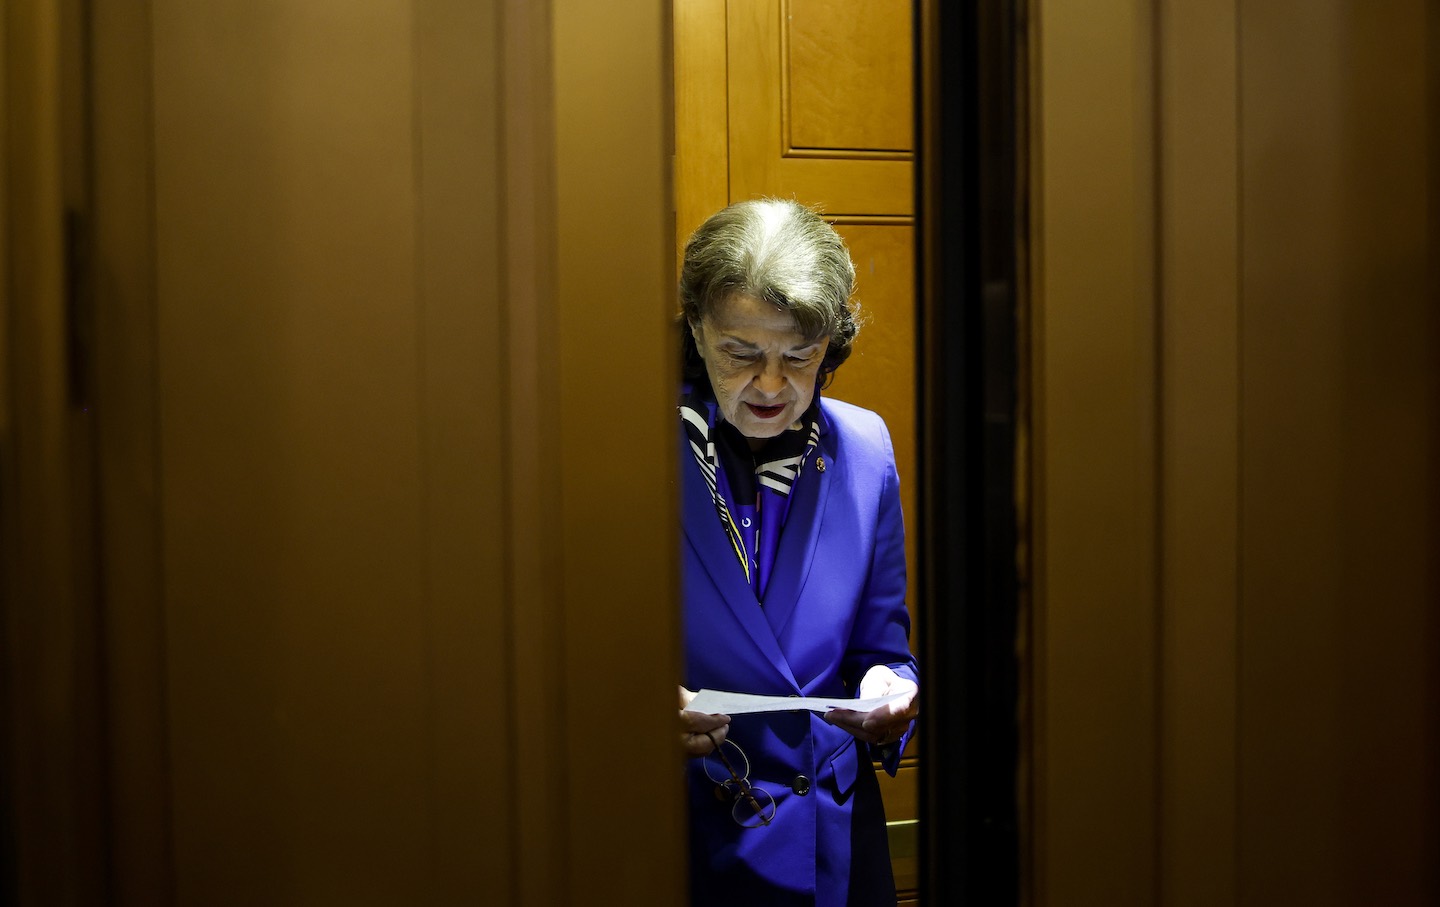 Will This Be the Year Dianne Feinstein Finally Retires?